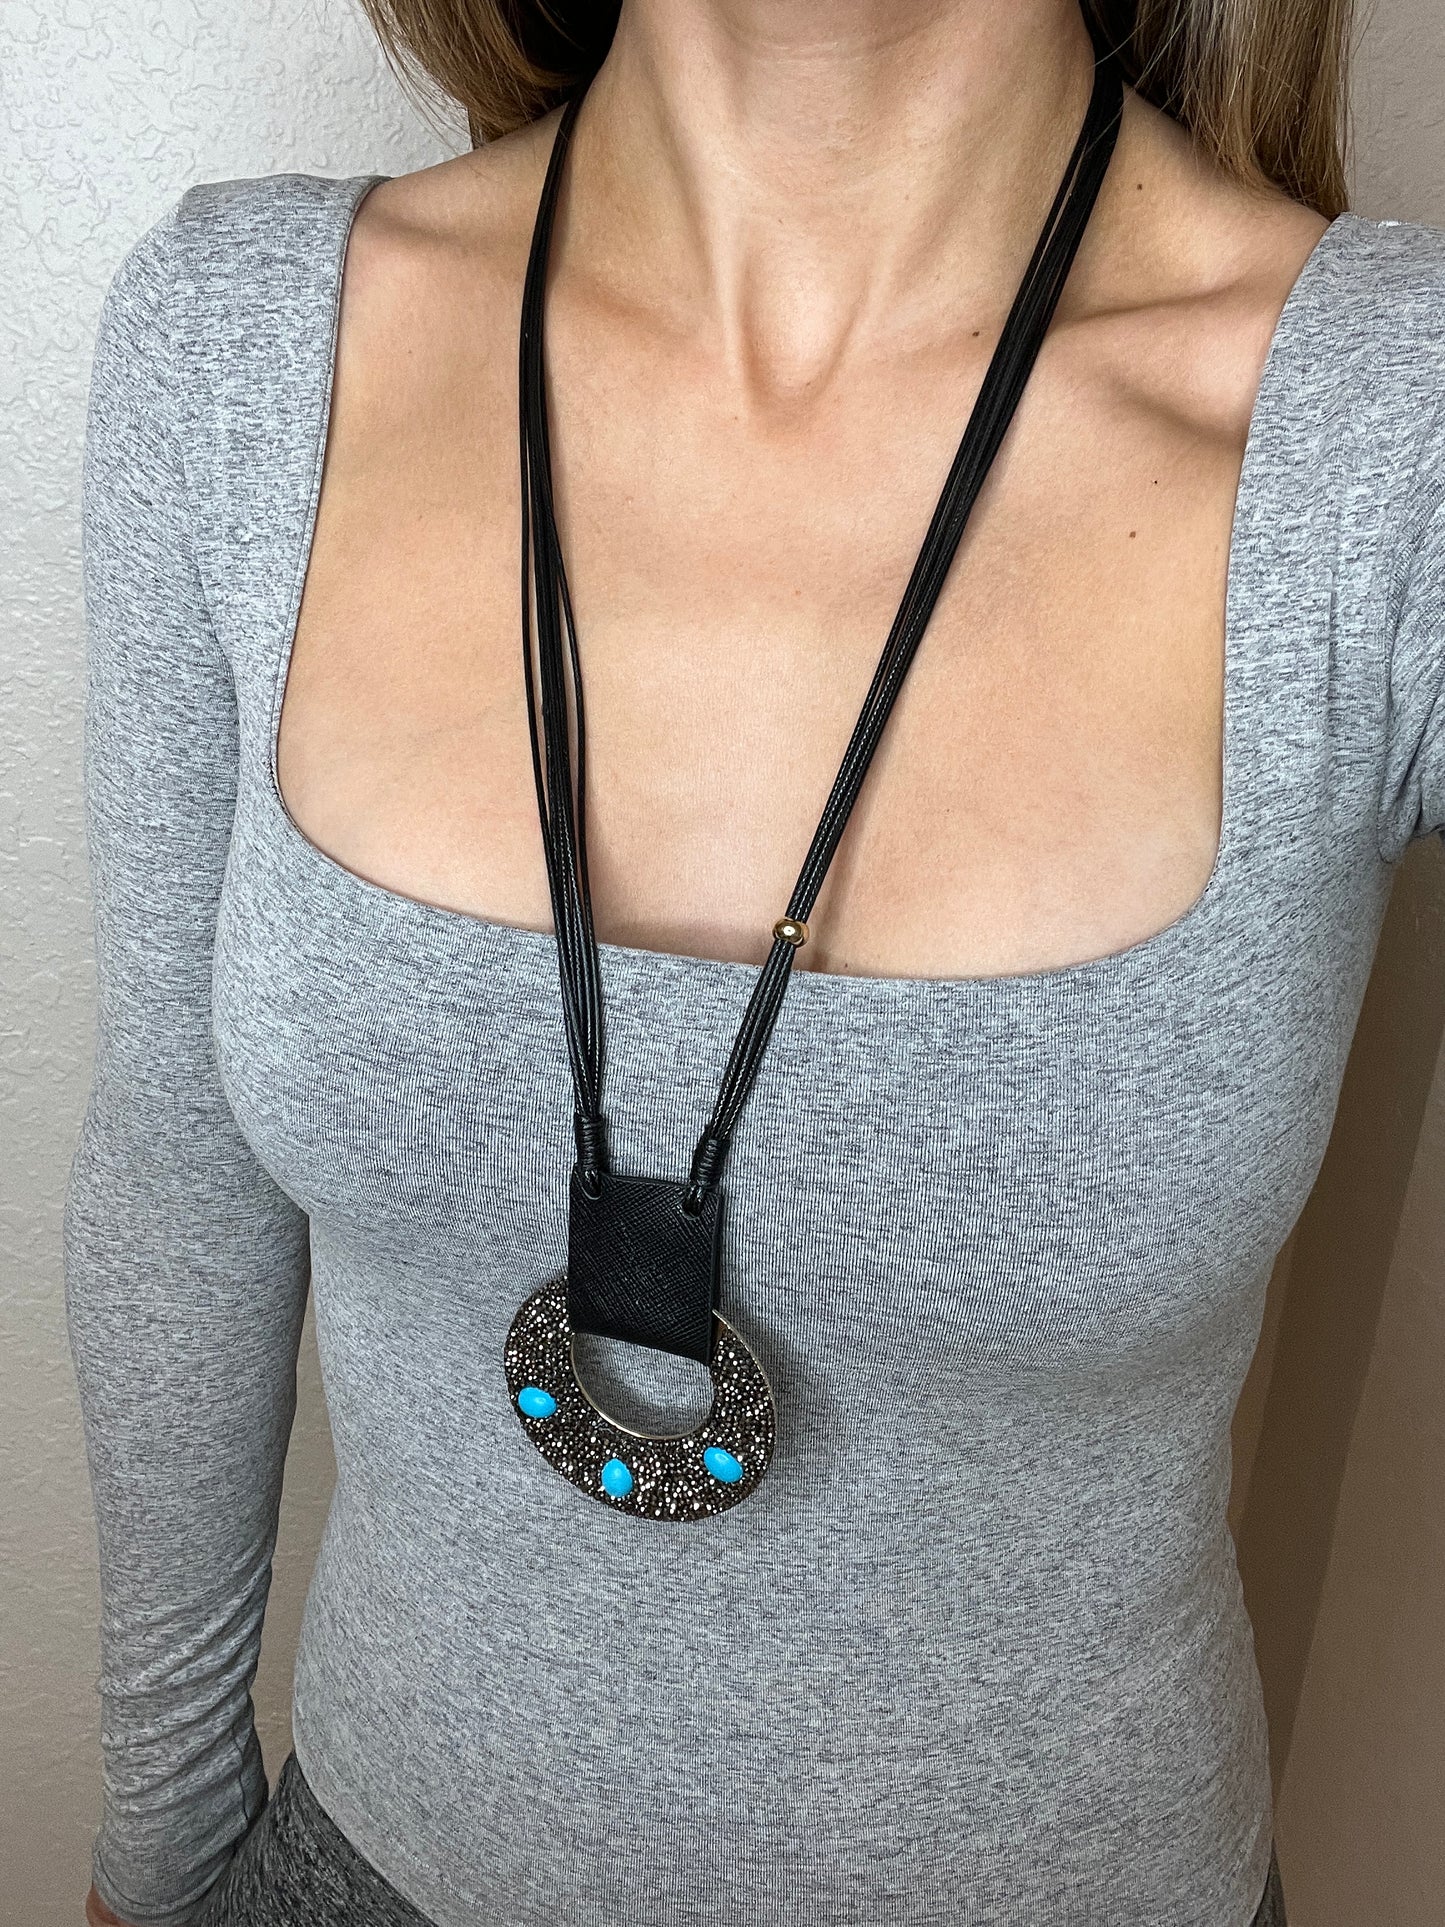 Load image into Gallery viewer, Turquoise Delights Leather Statement Necklace - Born To Glam
